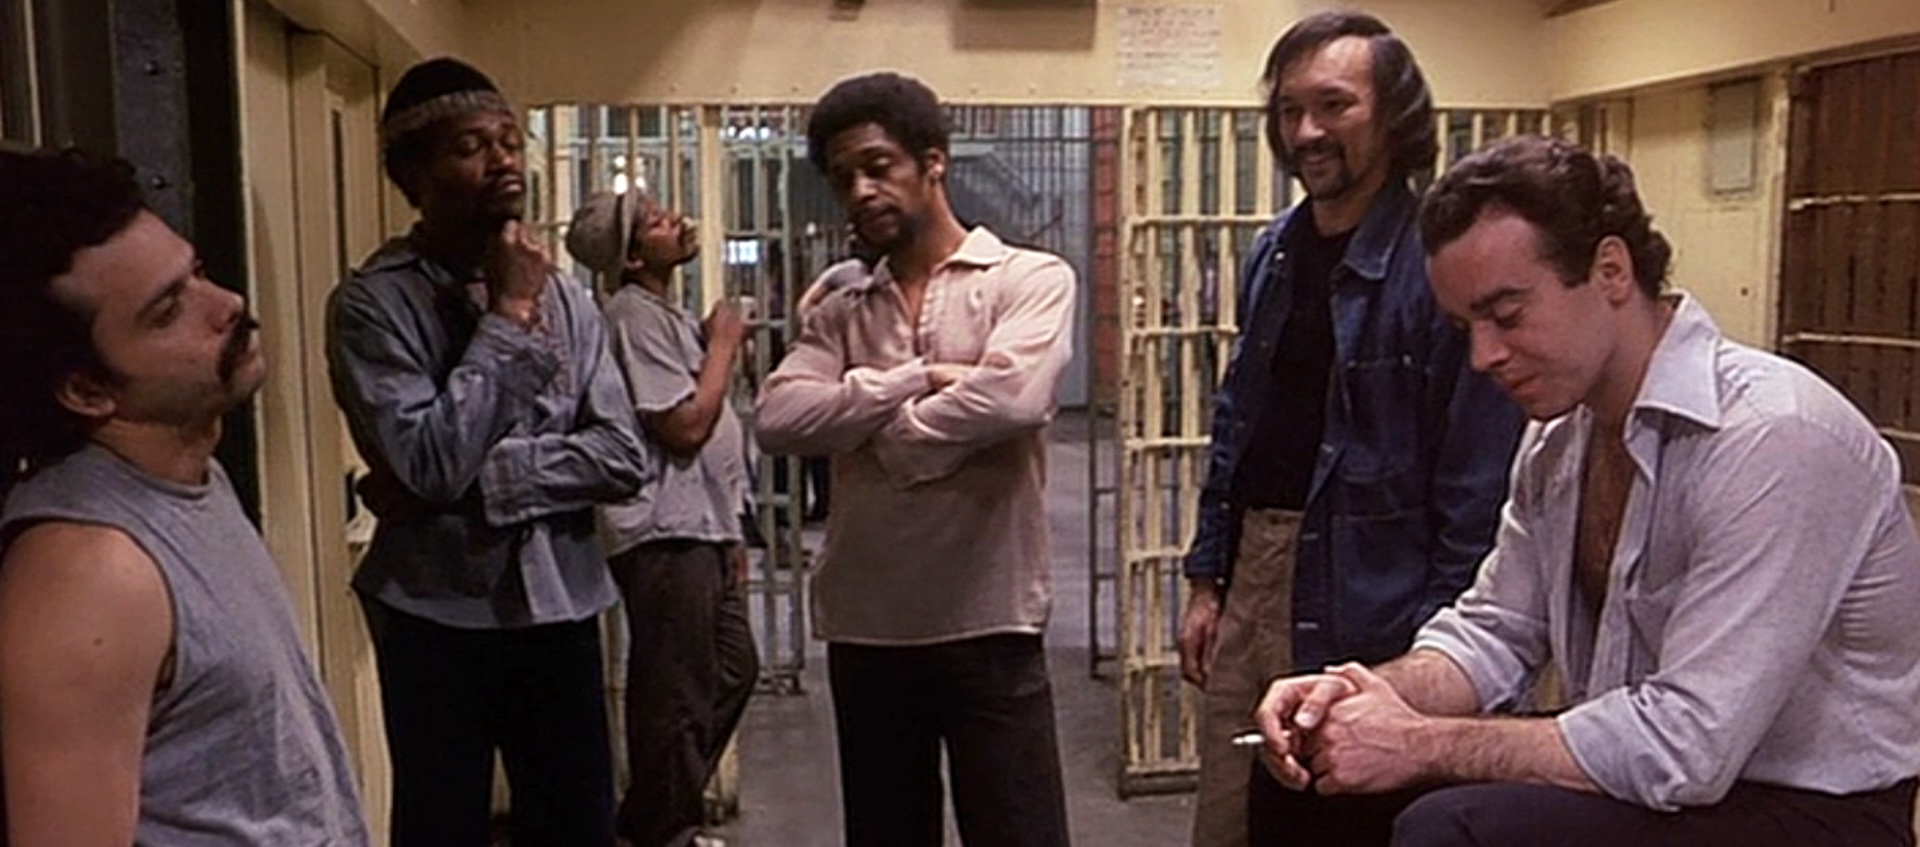 A group of men stand around a large prison cell.